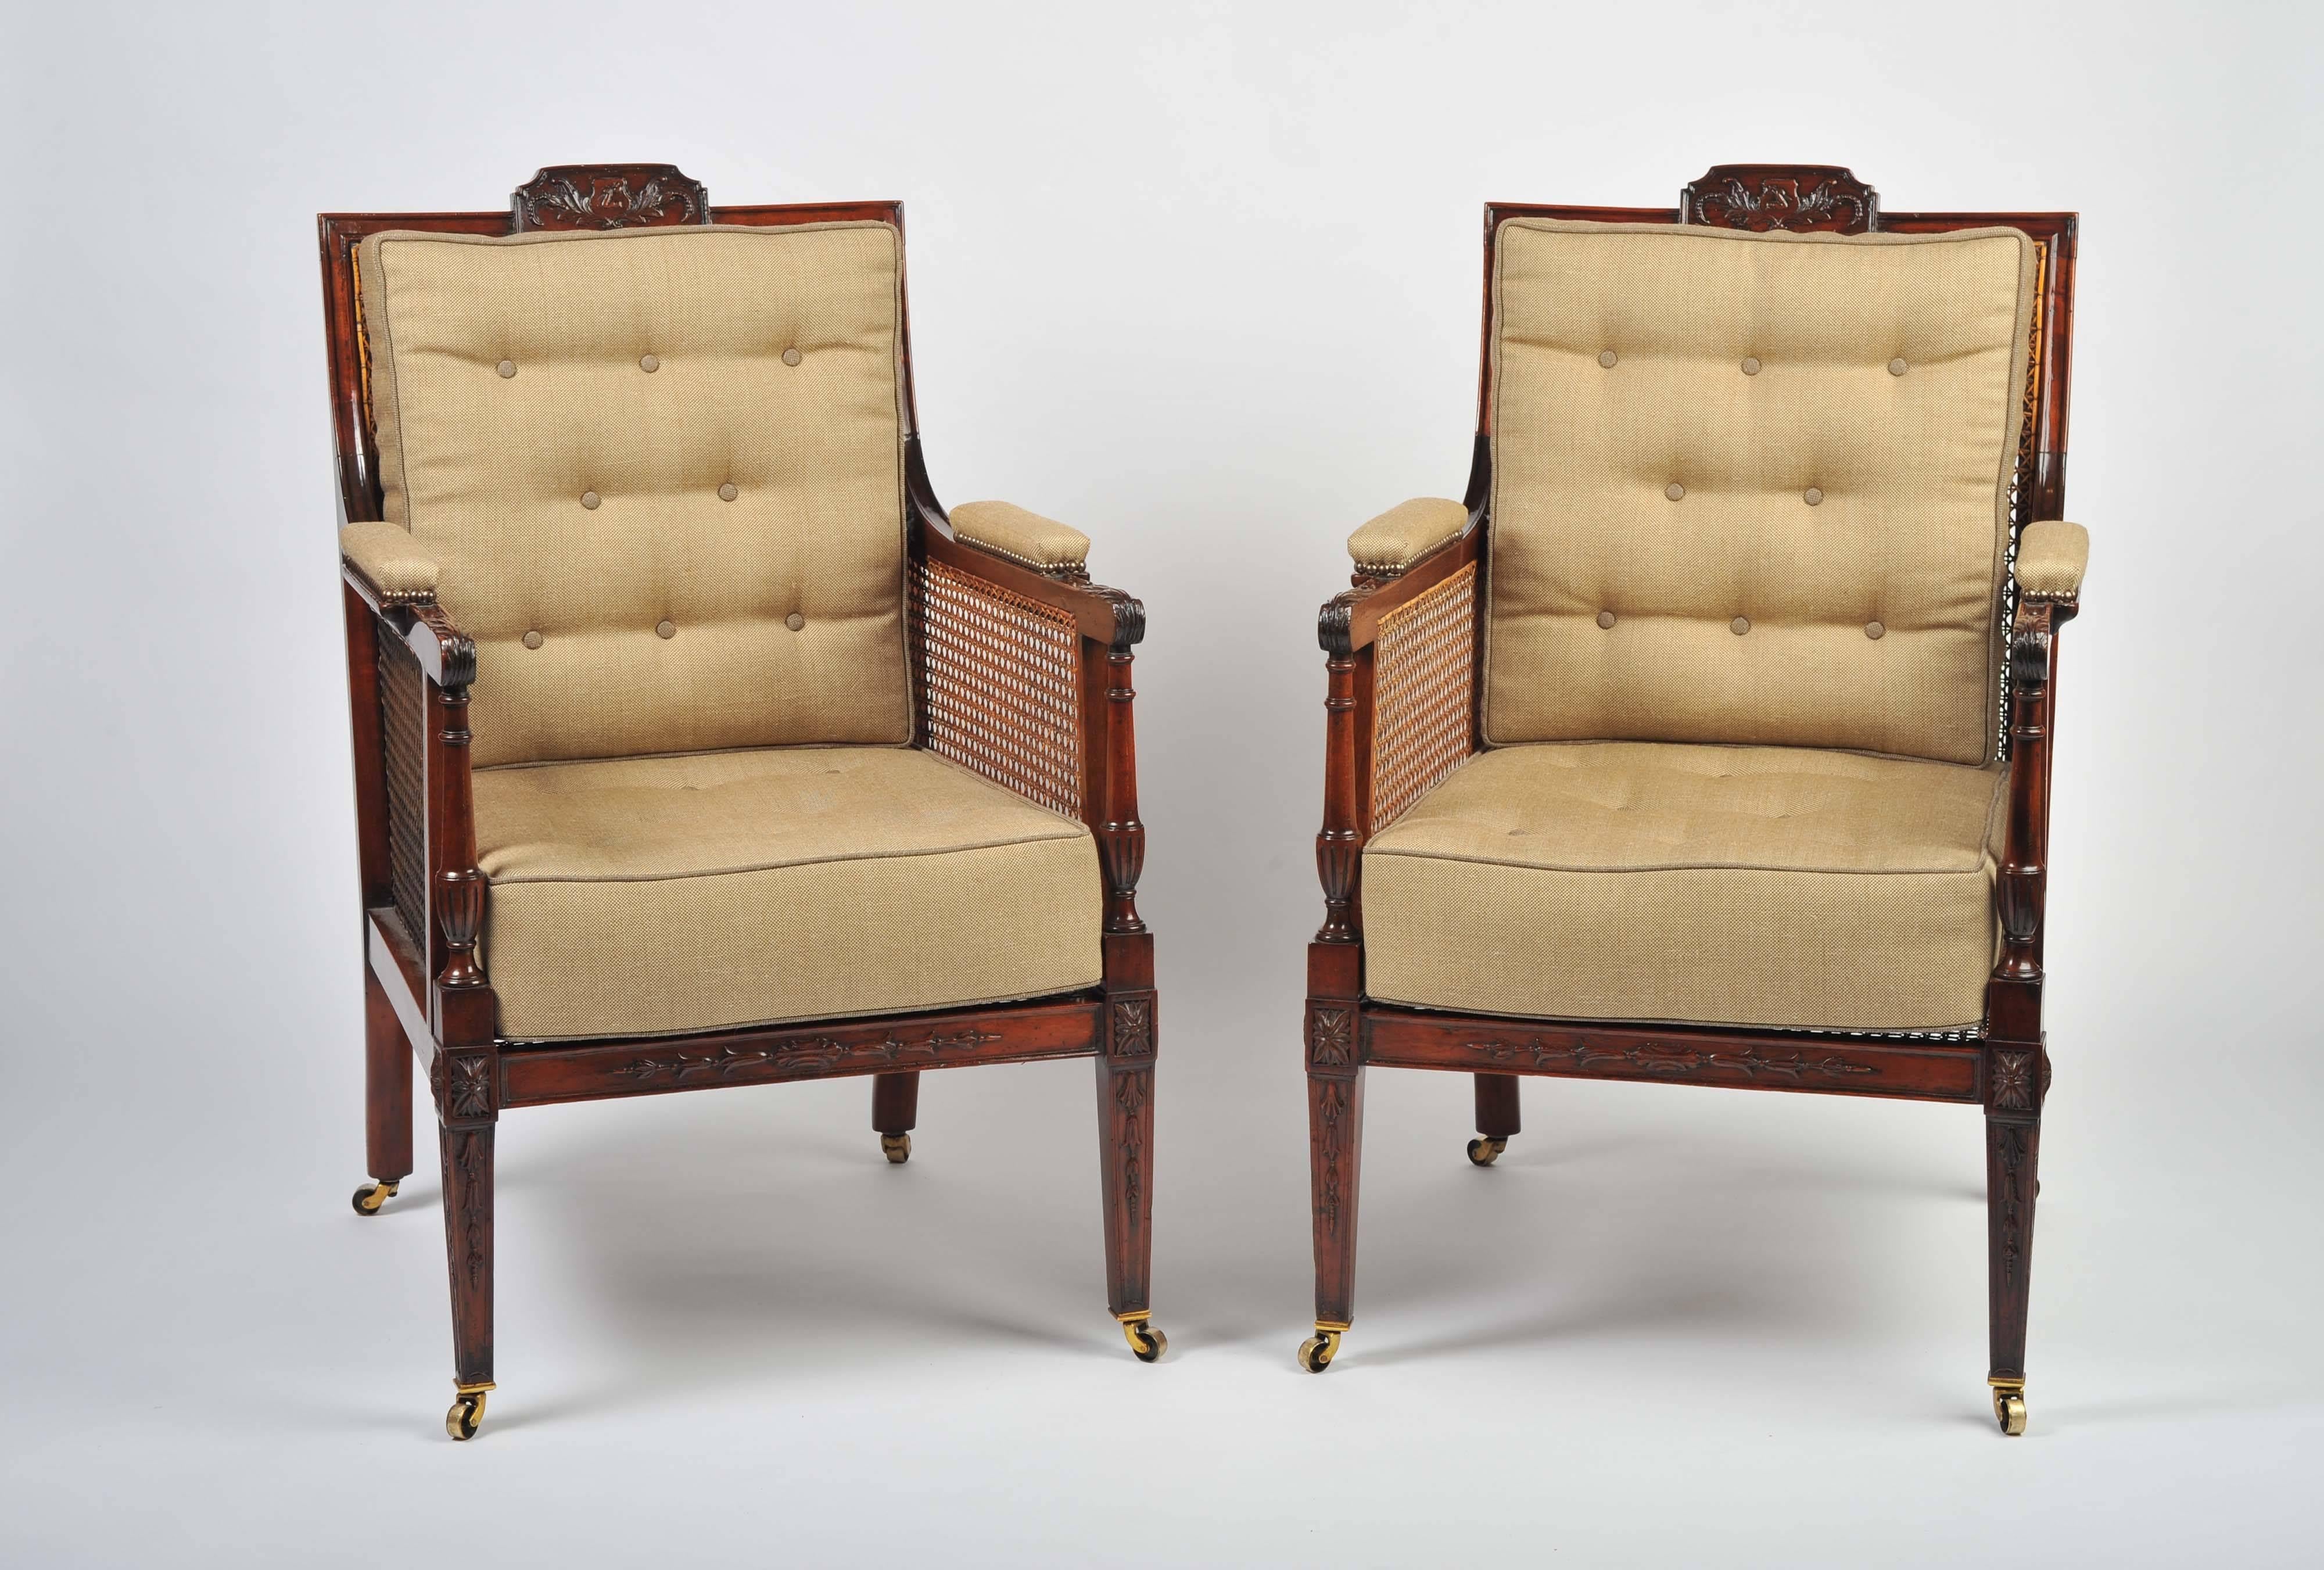 A superb pair of library chairs in the classical style with caned seats, sides and backs. The mahogany frames with finely carved decoration to the crested entablature top rail, arms and front legs.
The armrests padded and the cushions handmade in